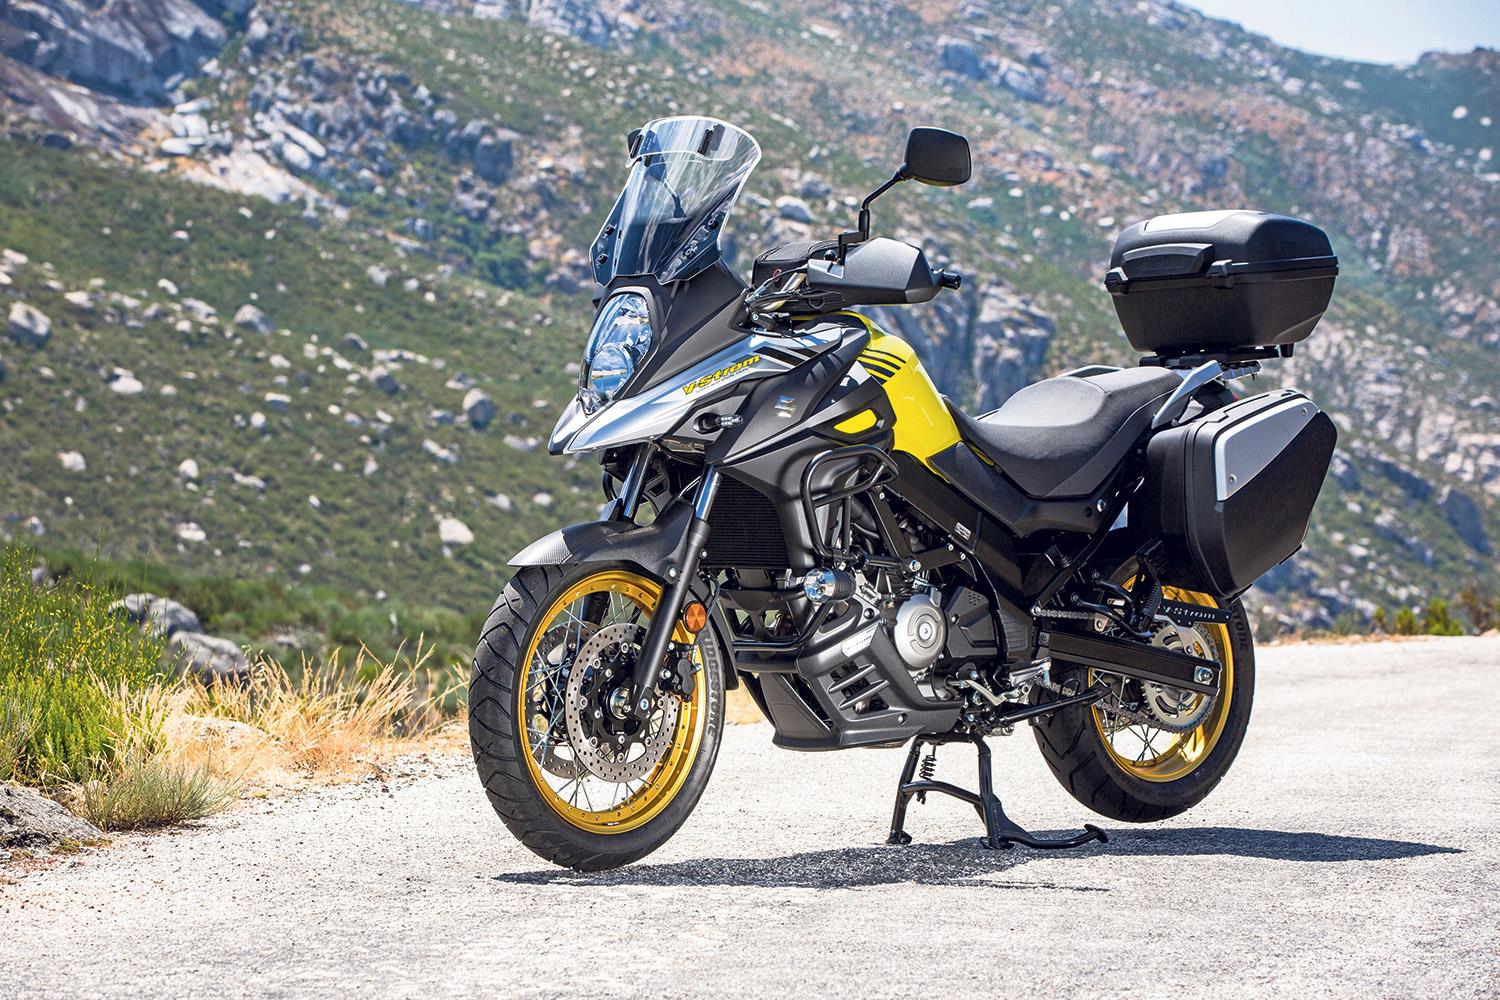 SUZUKI V-STROM 650 XT (2017-on) Motorcycle Review | MCN